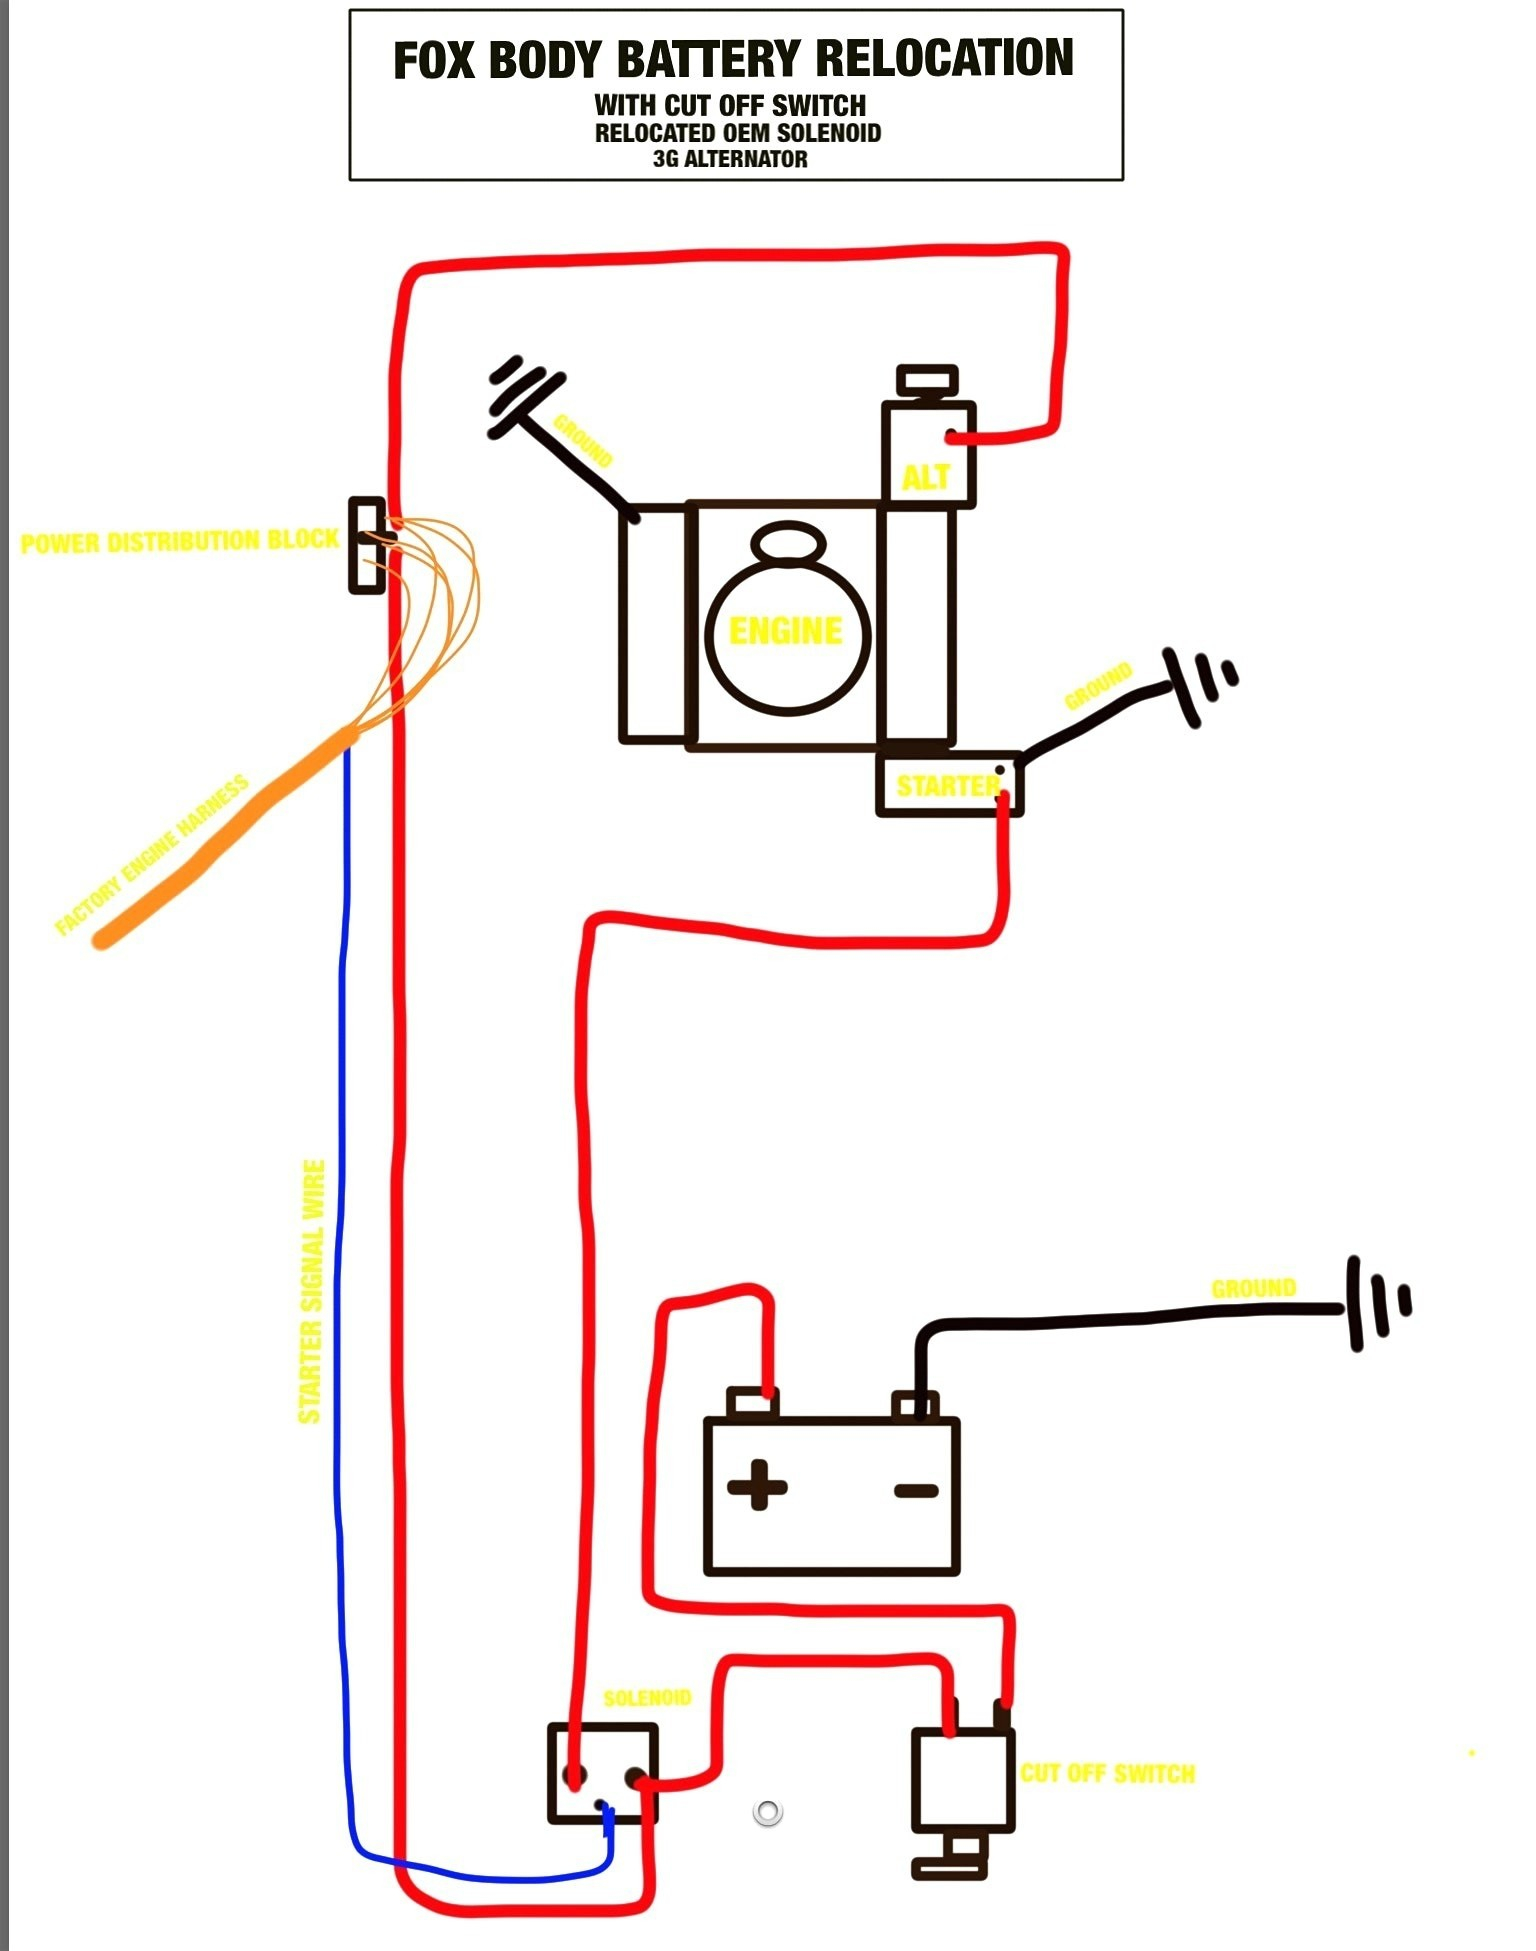 Rv Battery Disconnect Switch Wiring Diagram | Wiring Diagram - Rv Battery Disconnect Switch Wiring Diagram